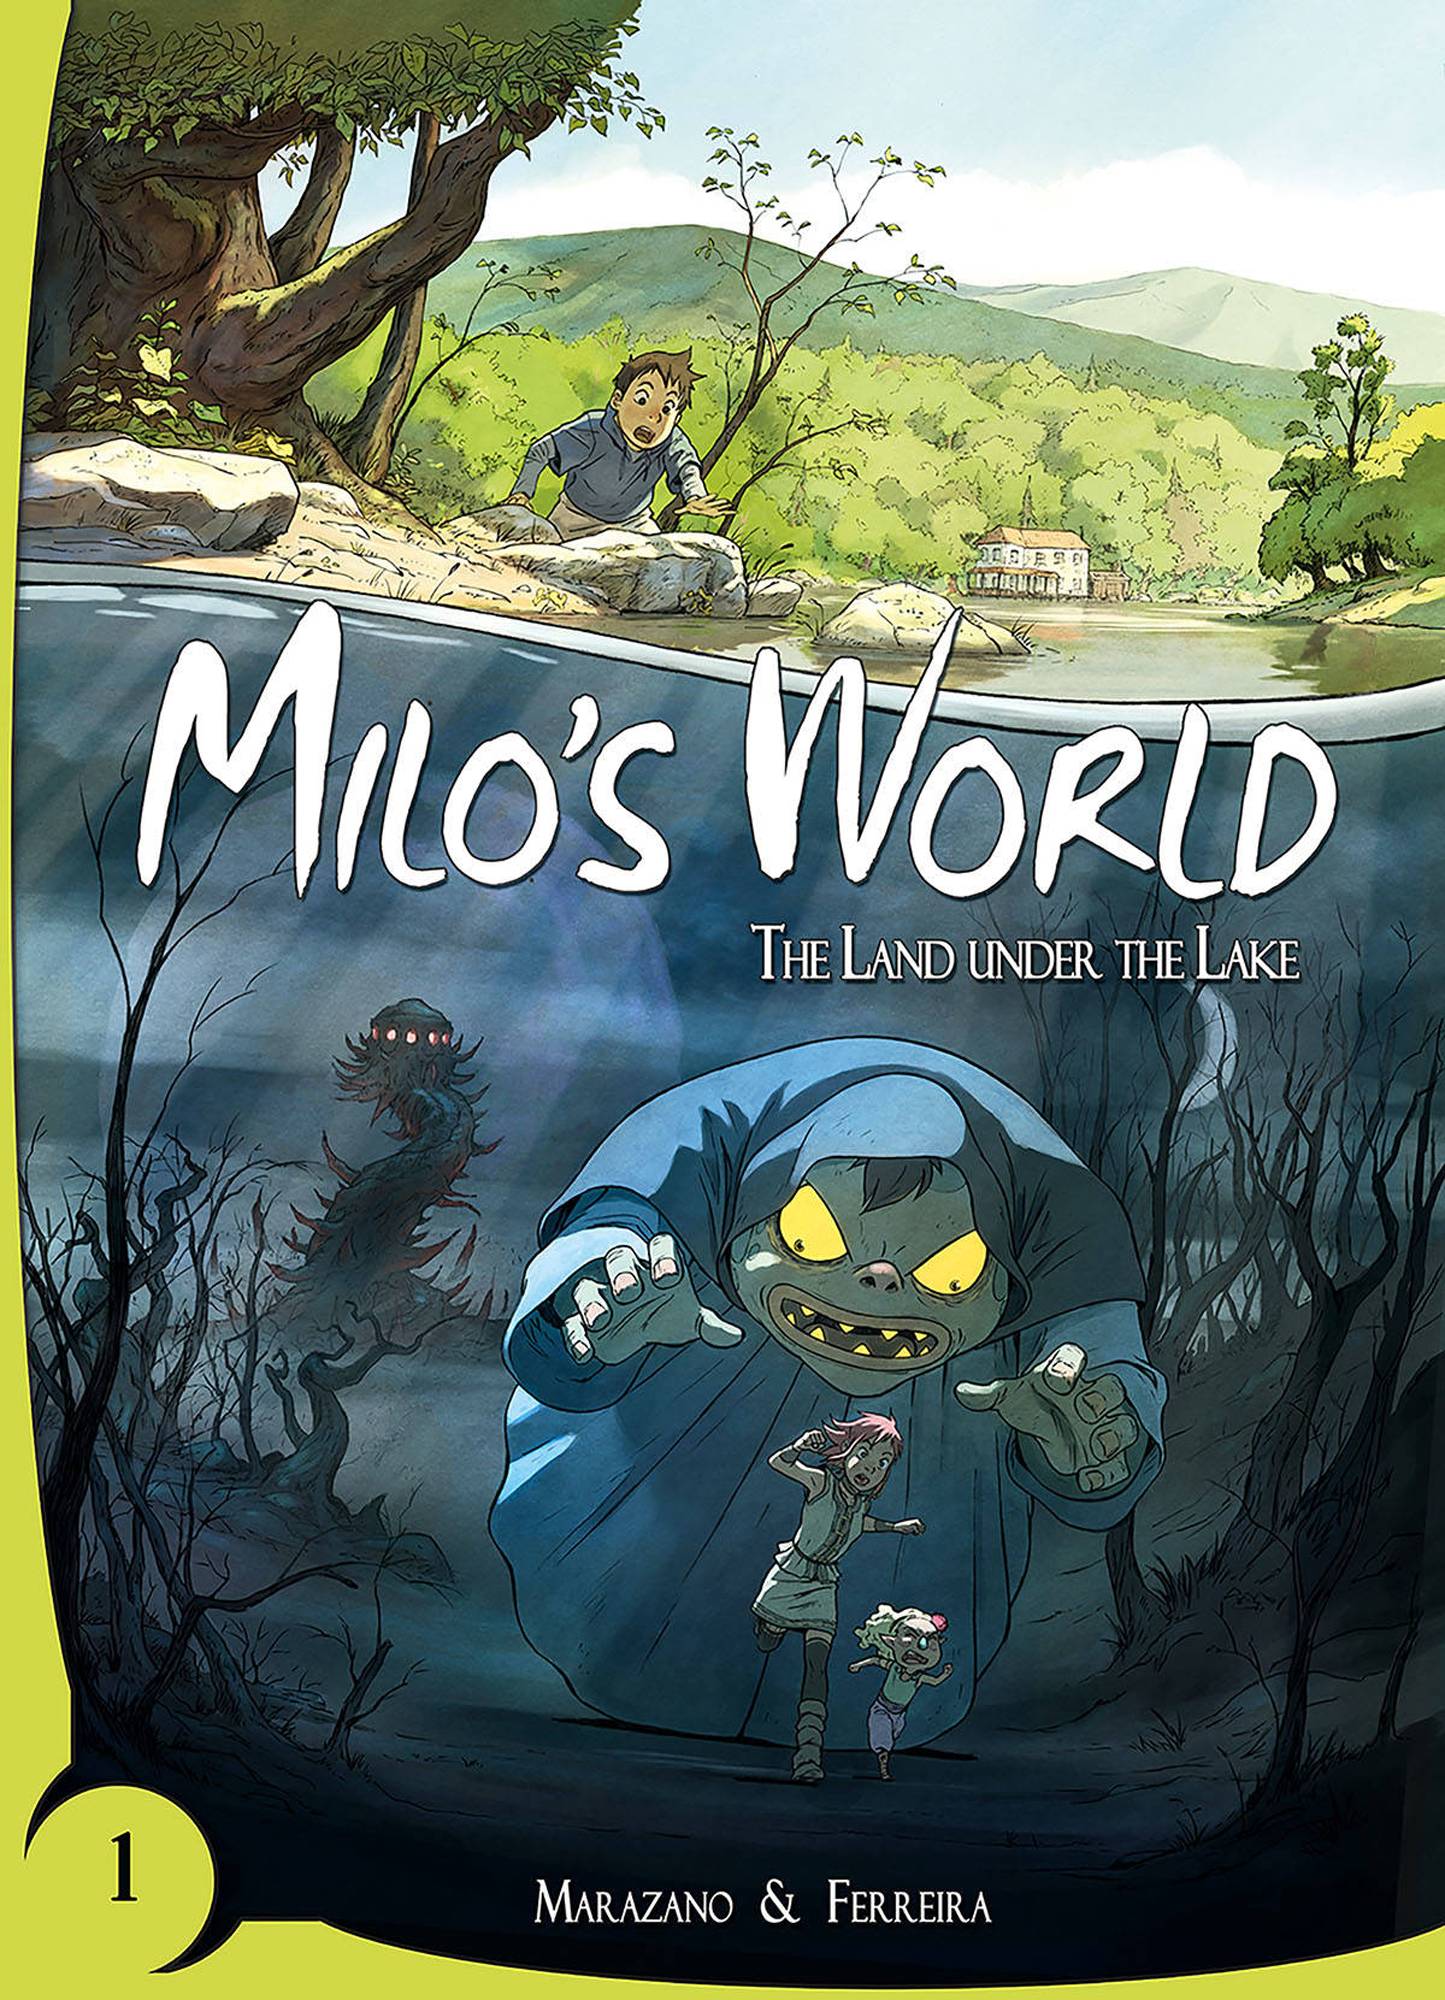 Milo's World Book 1 The Land Under the Lake